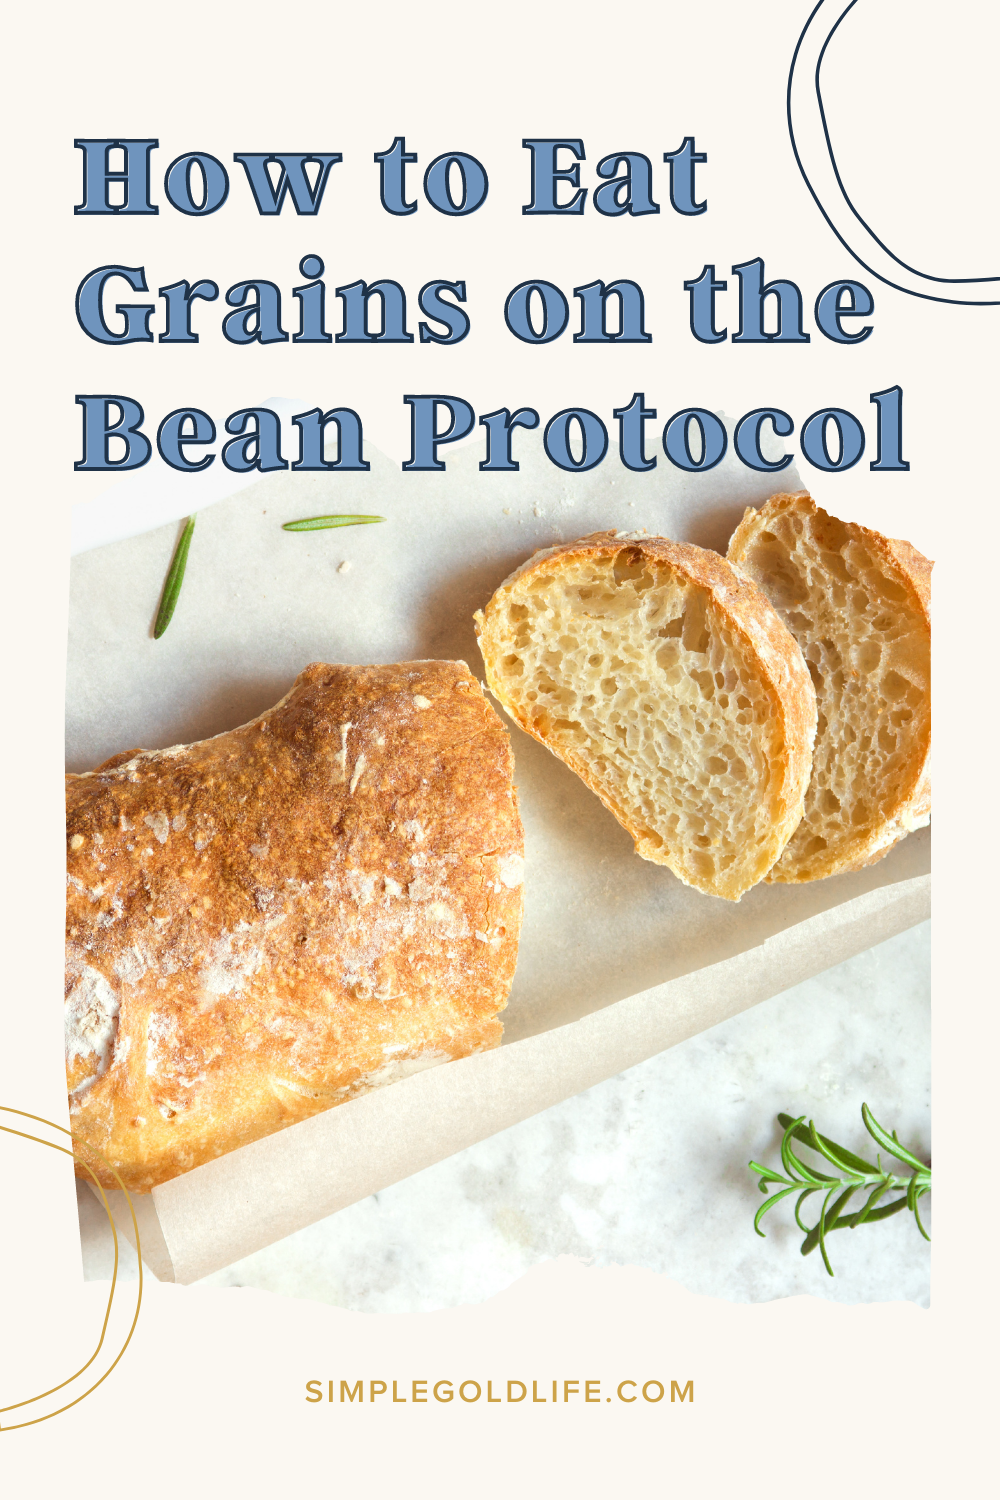 Benefits of Grains on the Bean Protocol 8.png